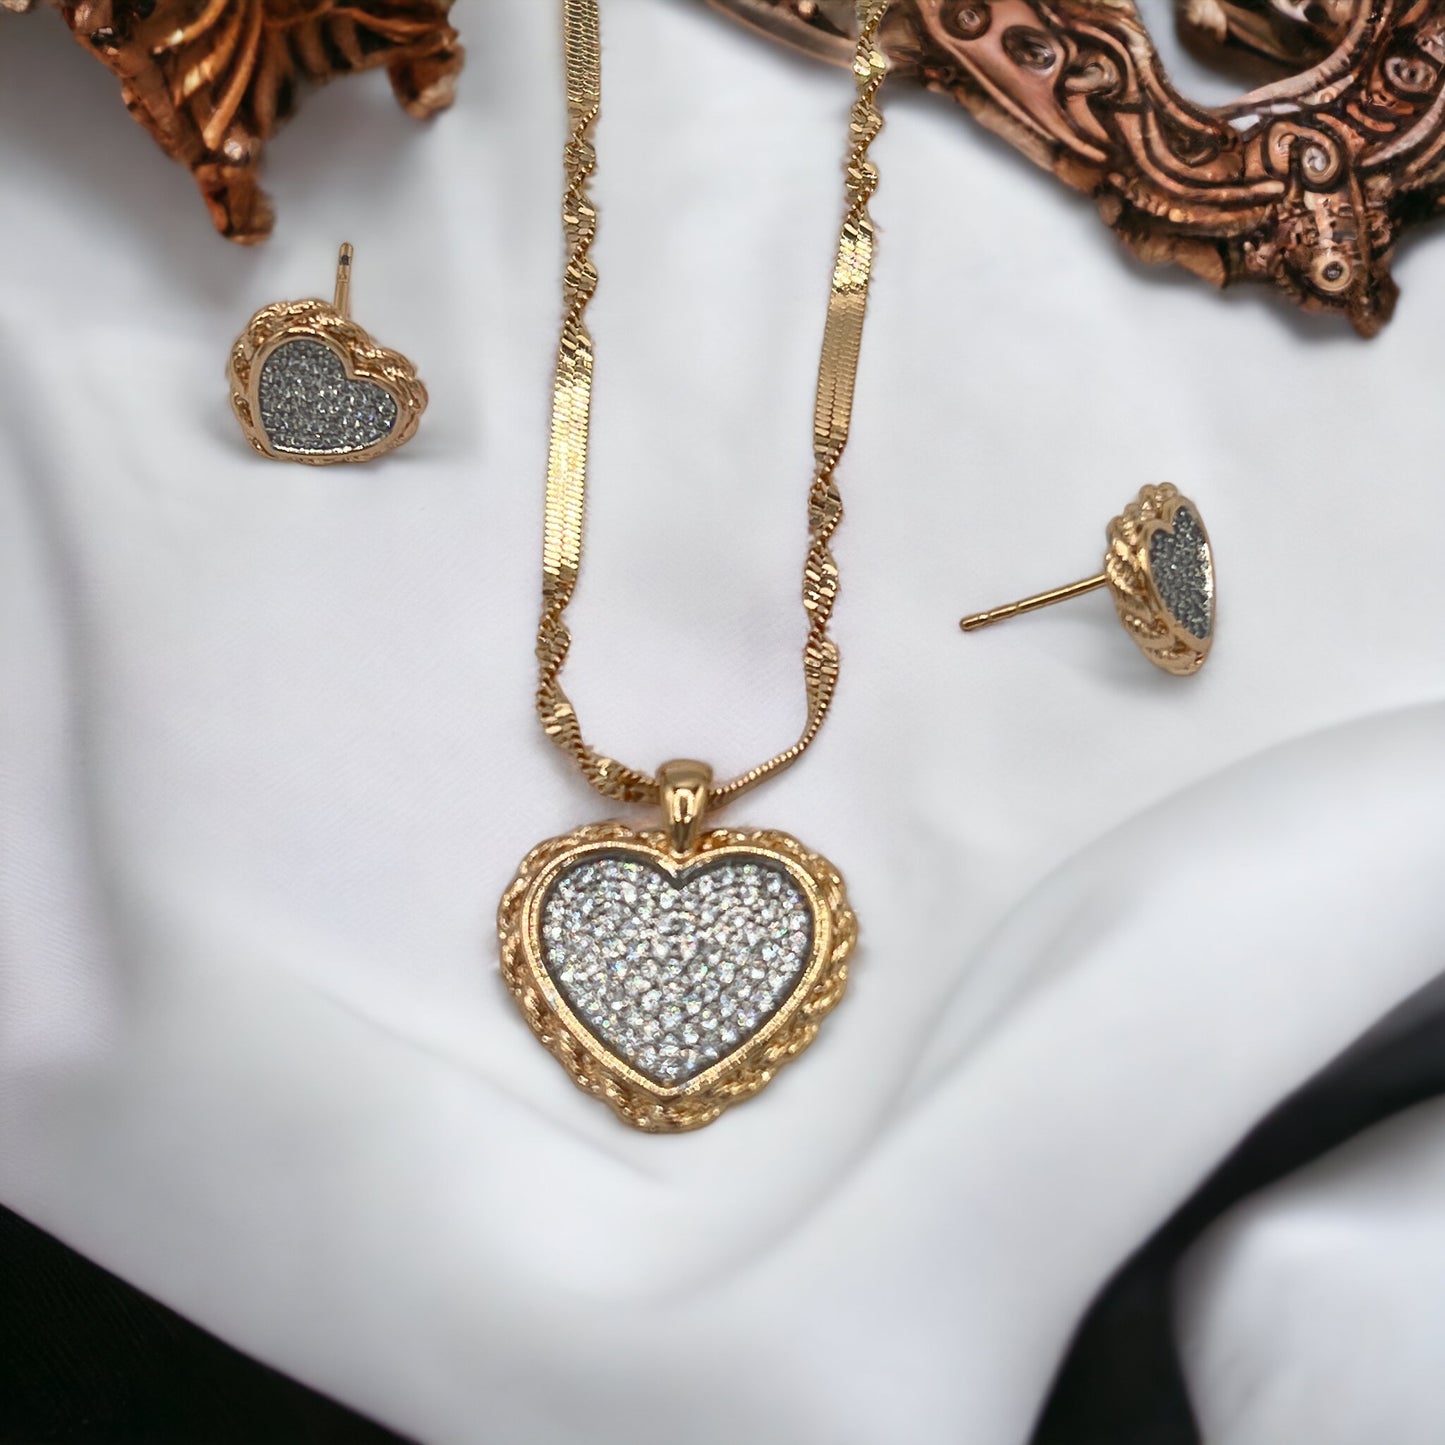 Diamond Heart-Shaped Studs and Necklace Sets - Gold-Plated Elegance for a Timeless Love Affair